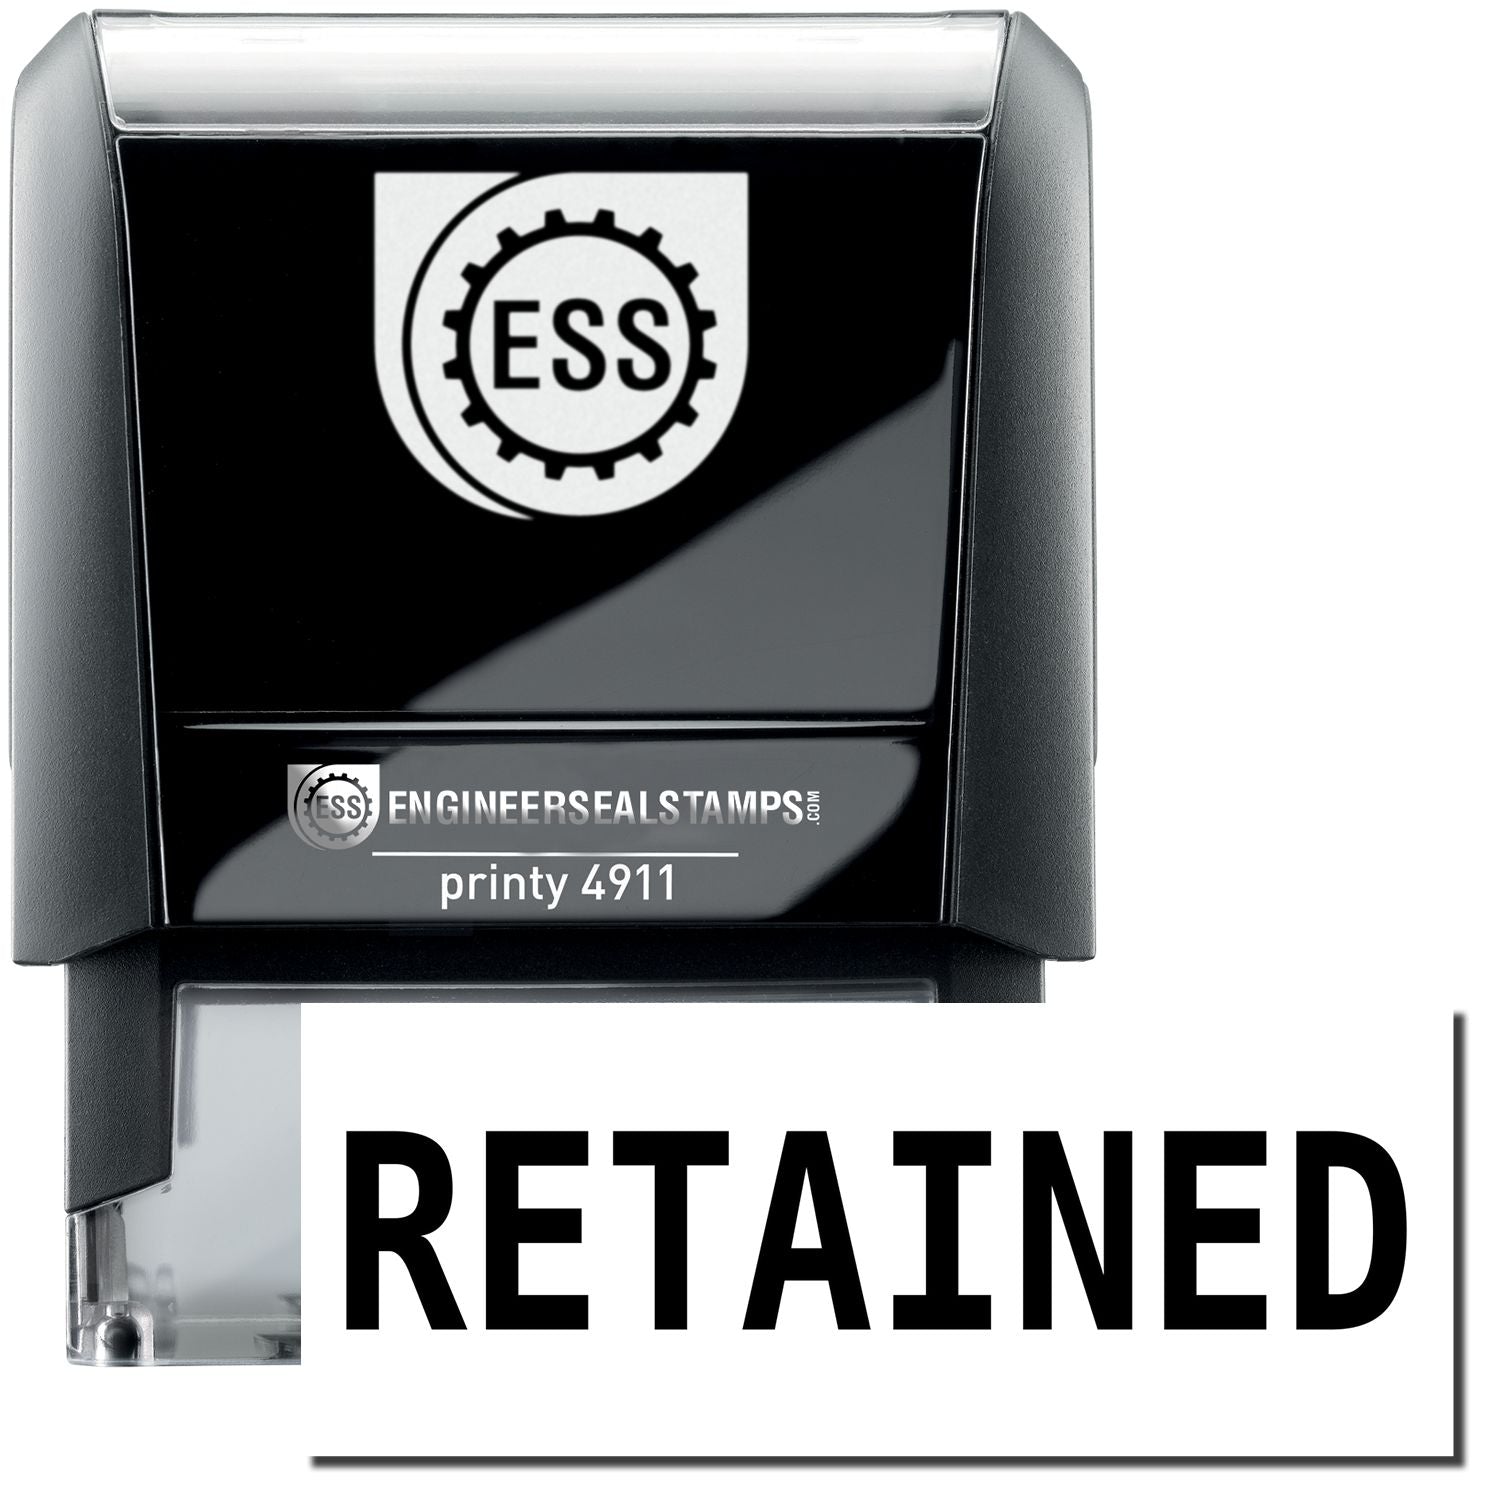 A self-inking stamp with a stamped image showing how the text "RETAINED" is displayed after stamping.